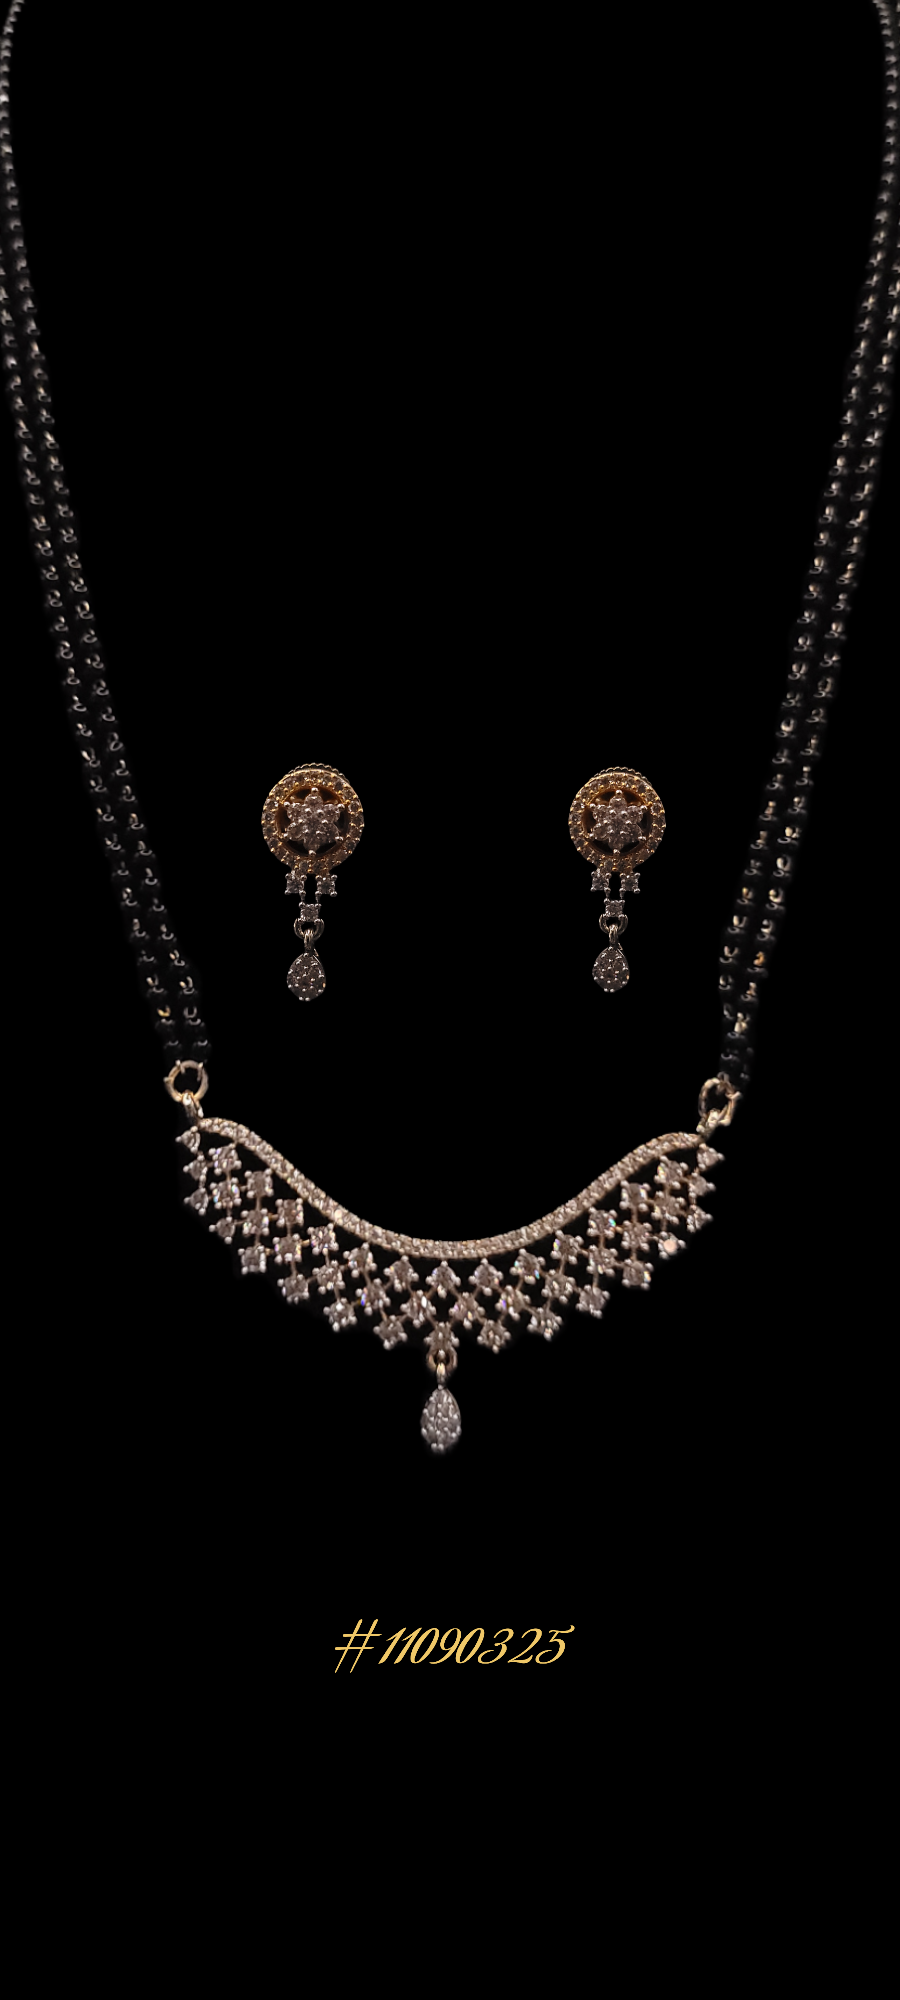 ELEGANT AND SPARKLING MANGALSUTRA SET IN GOLD COLOR WITH DIAMONDS